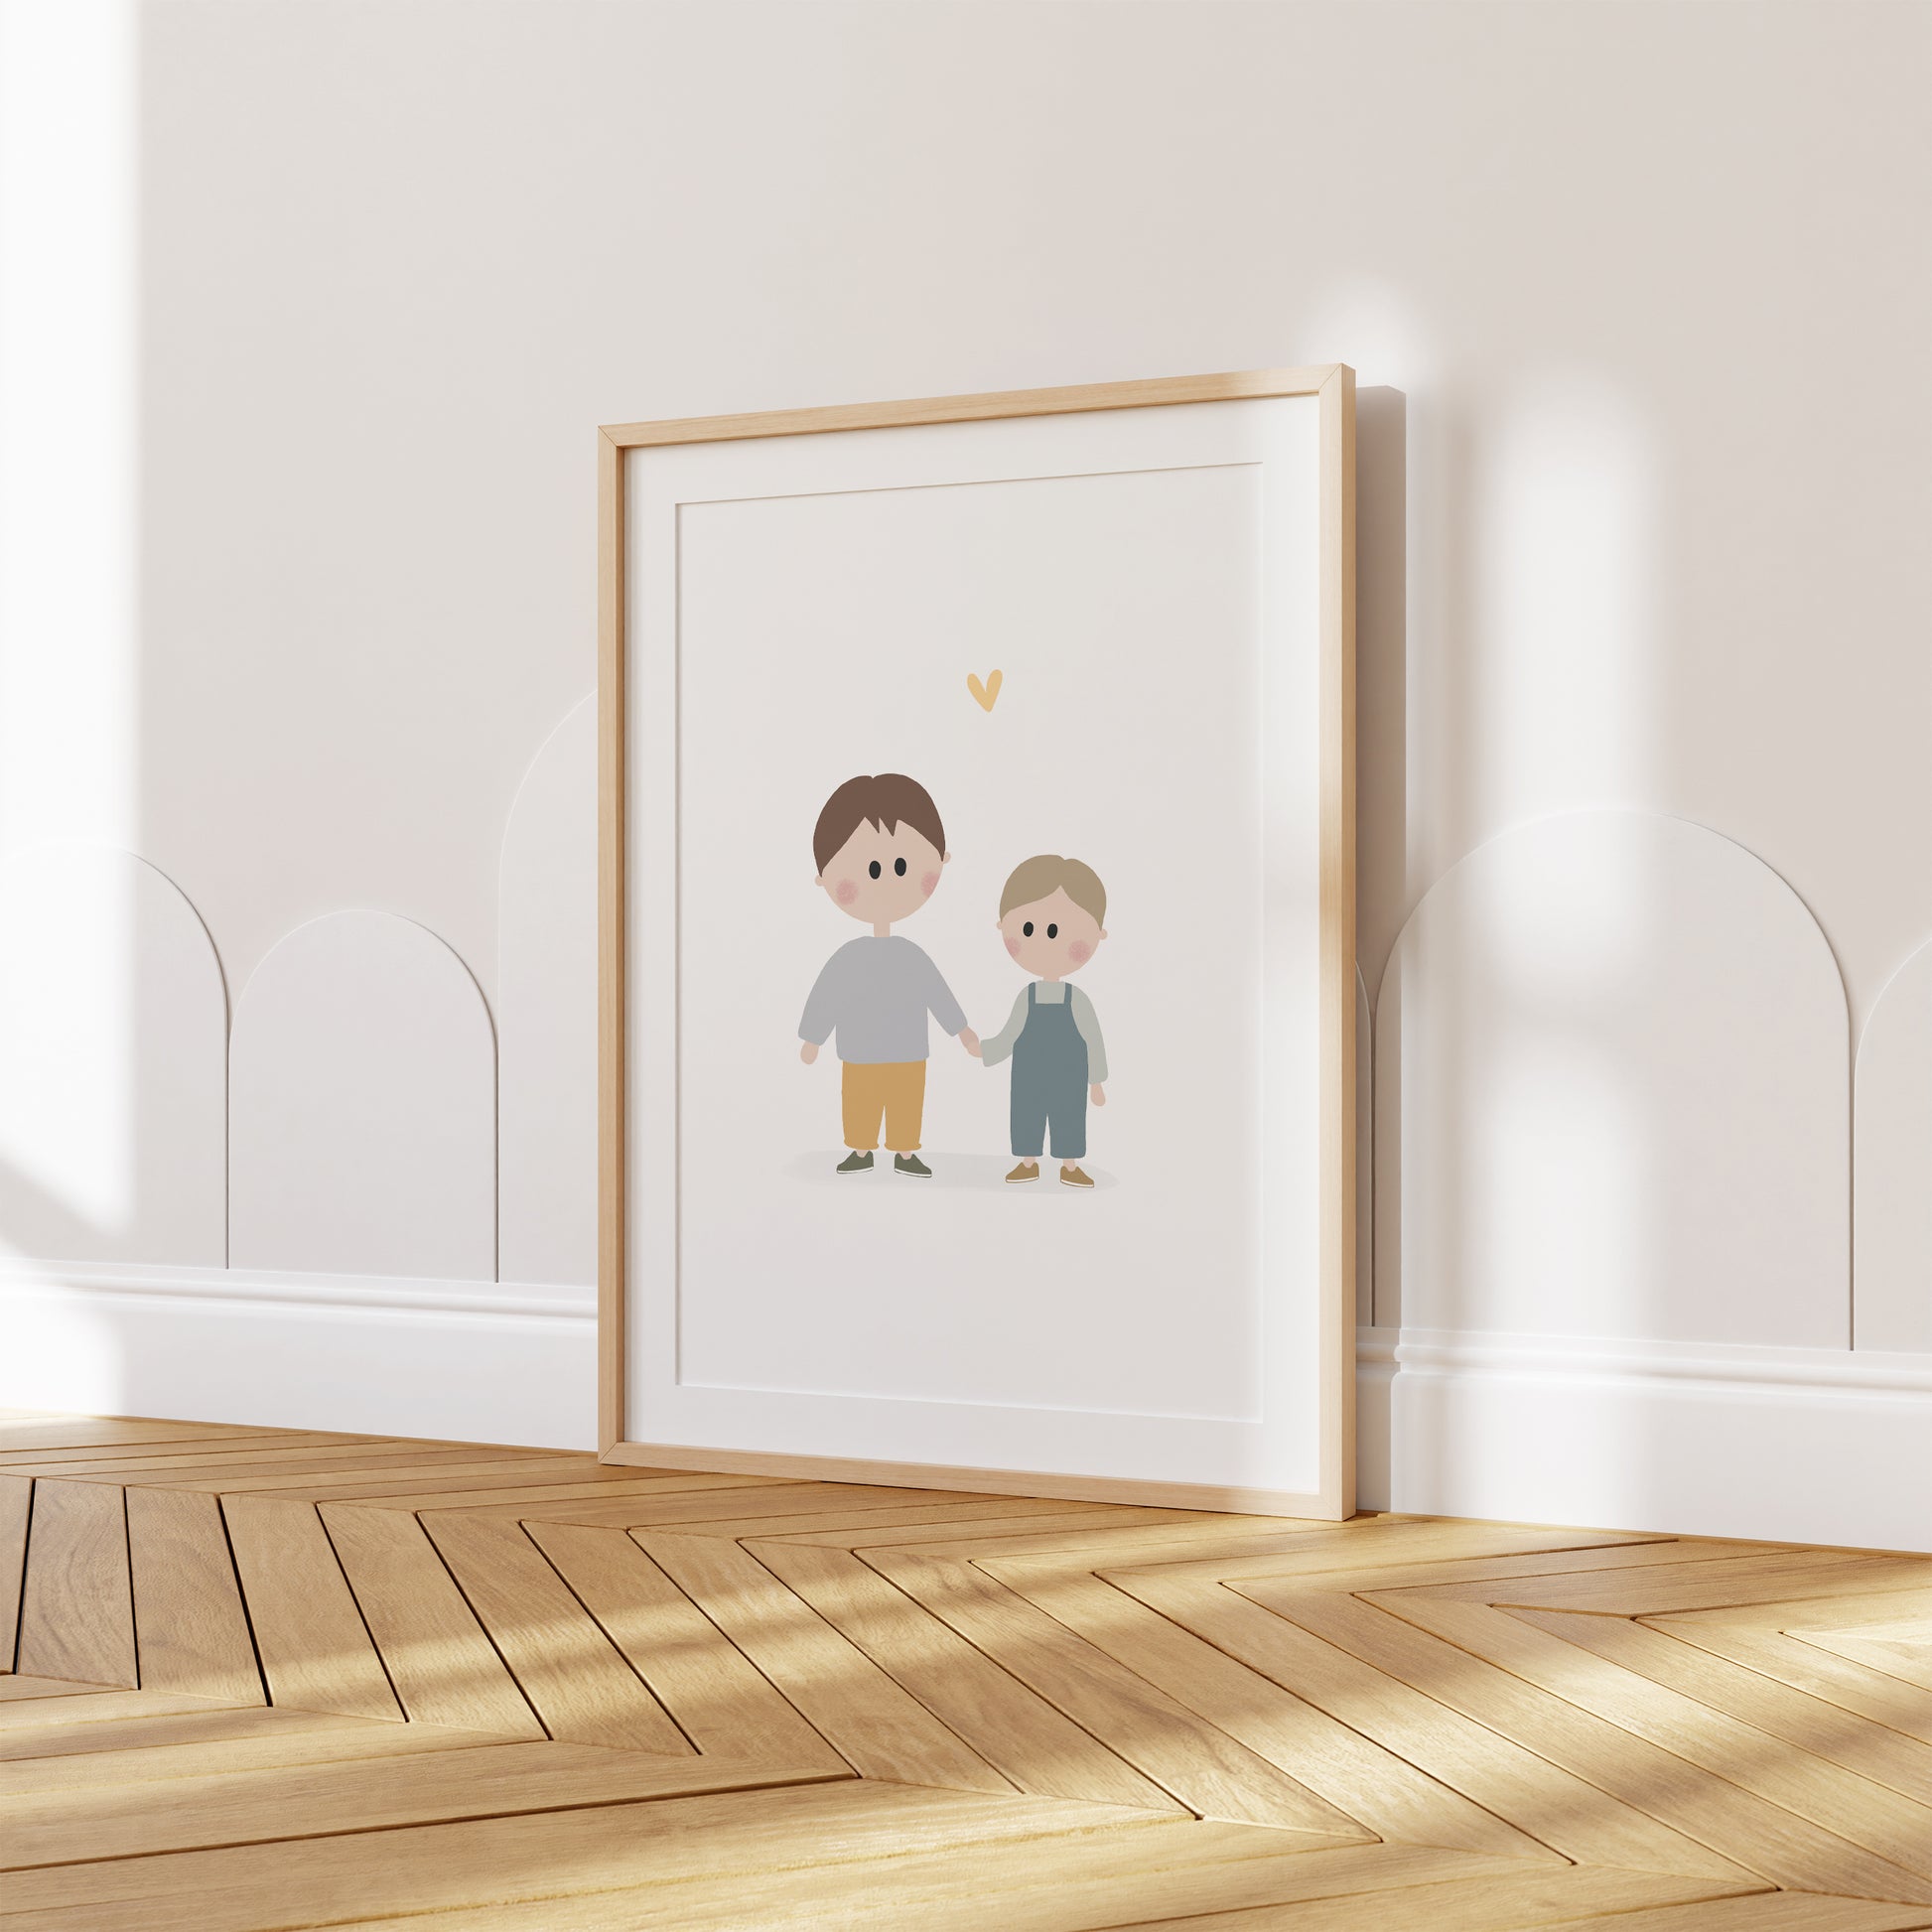 A beautifully illustrated art print featuring little brothers. This poster certainly brings joy and tenderness to your walls with soft pastel colors.